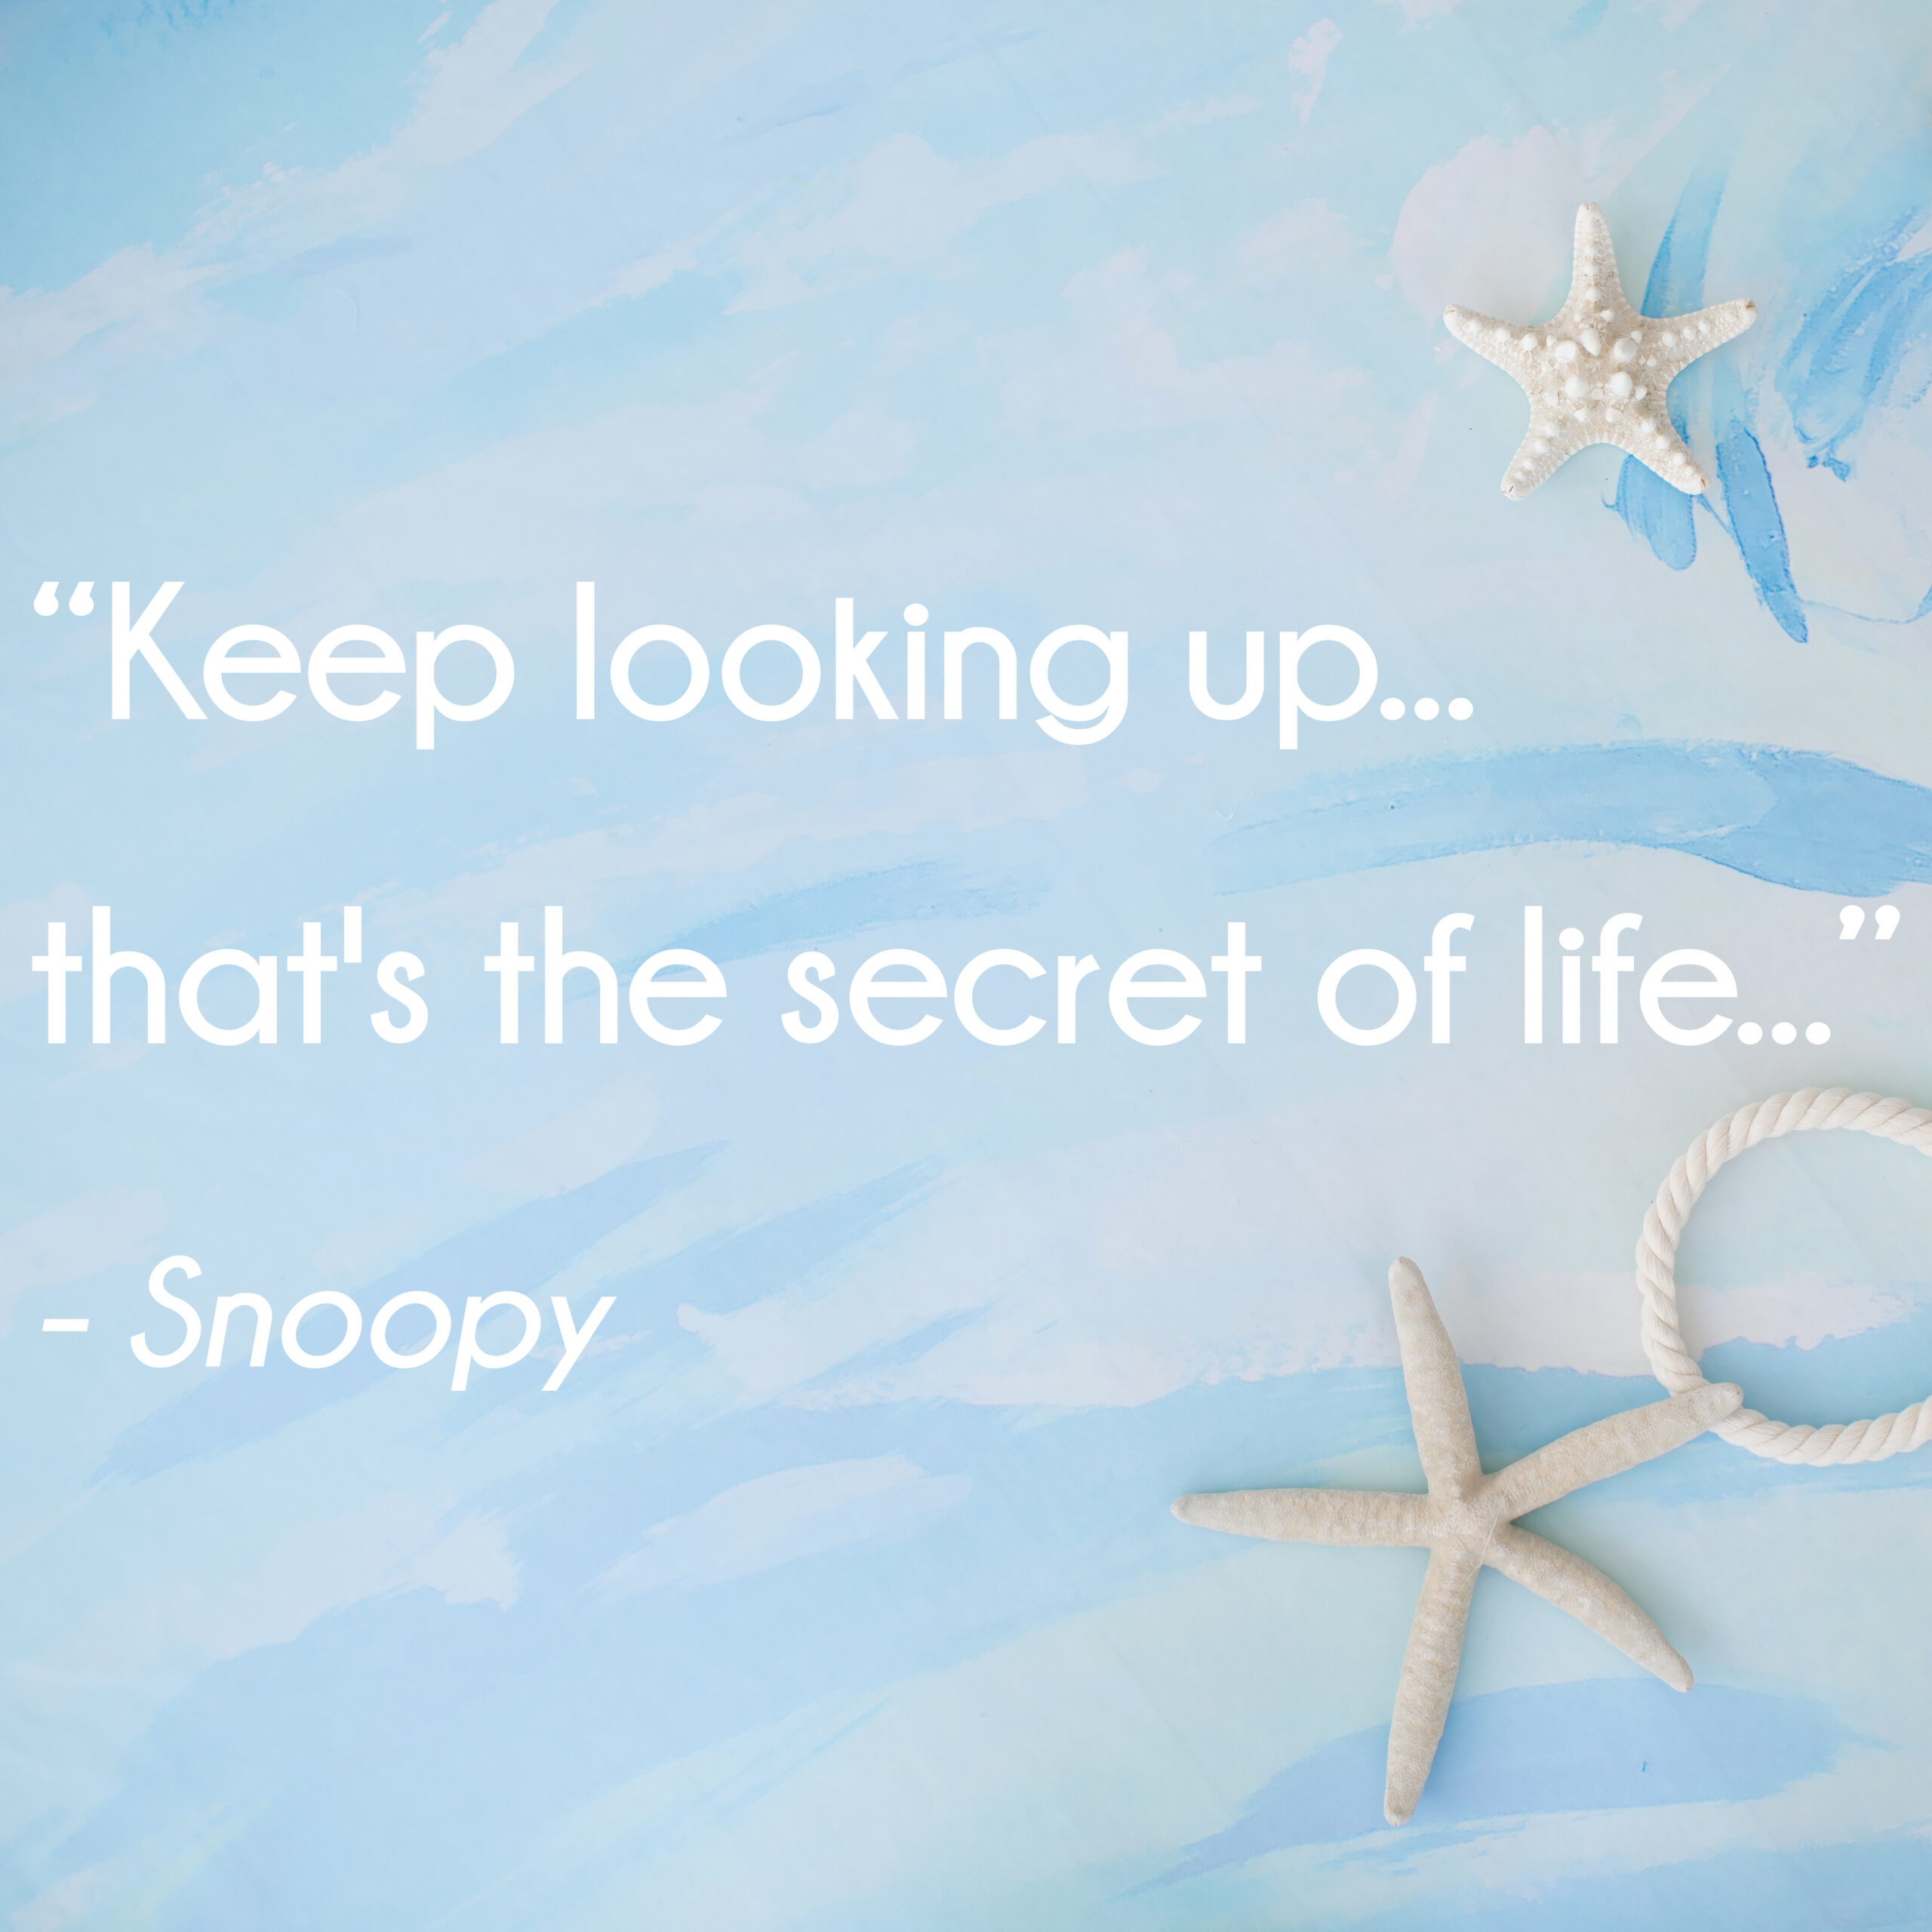 Keep looking up...that's the secret of life...